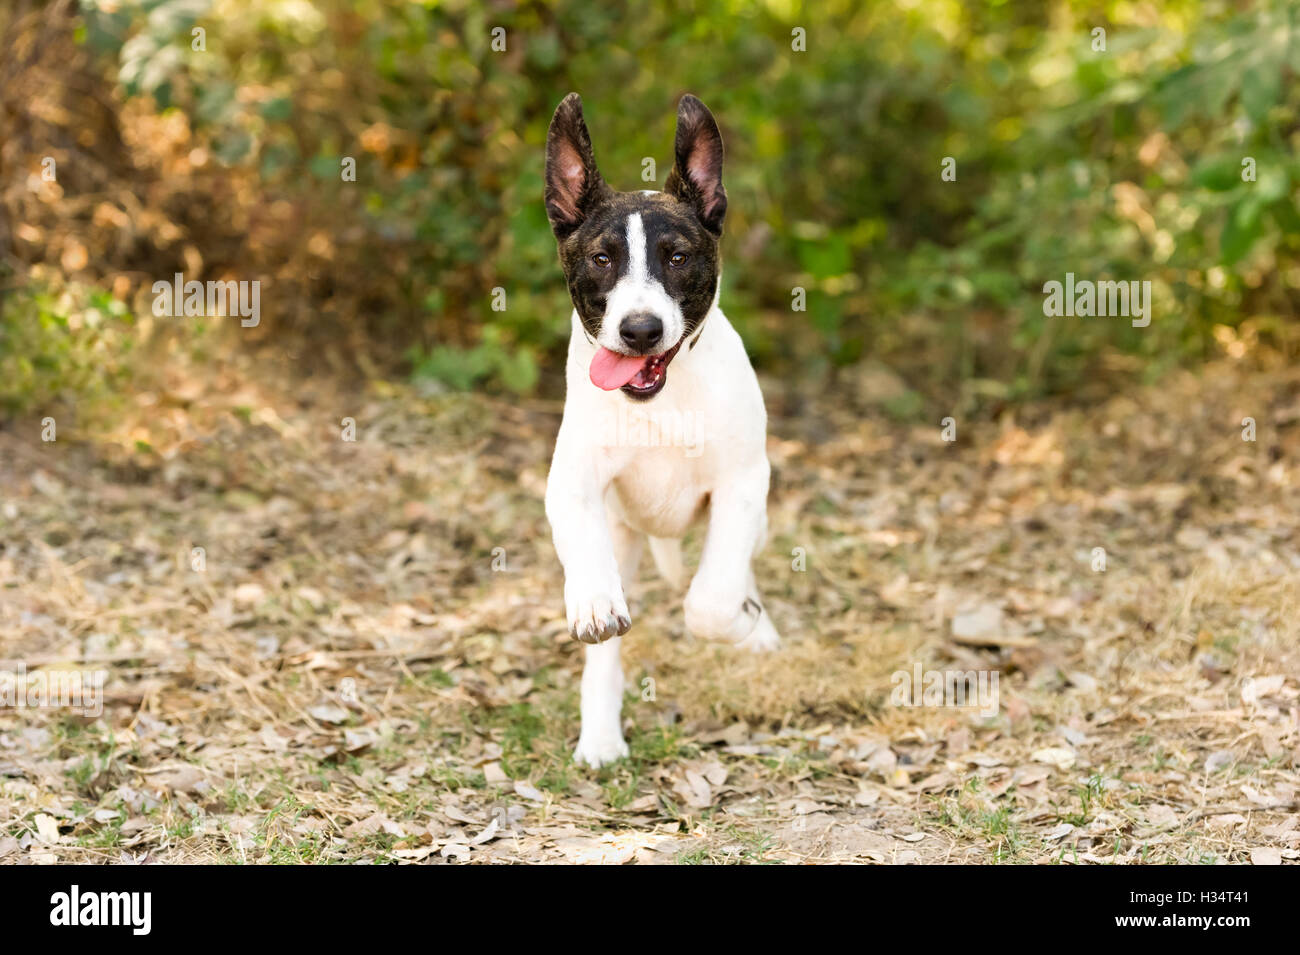 Dog running as a cute puppy dog running captured with high speed synch flash. Stock Photo